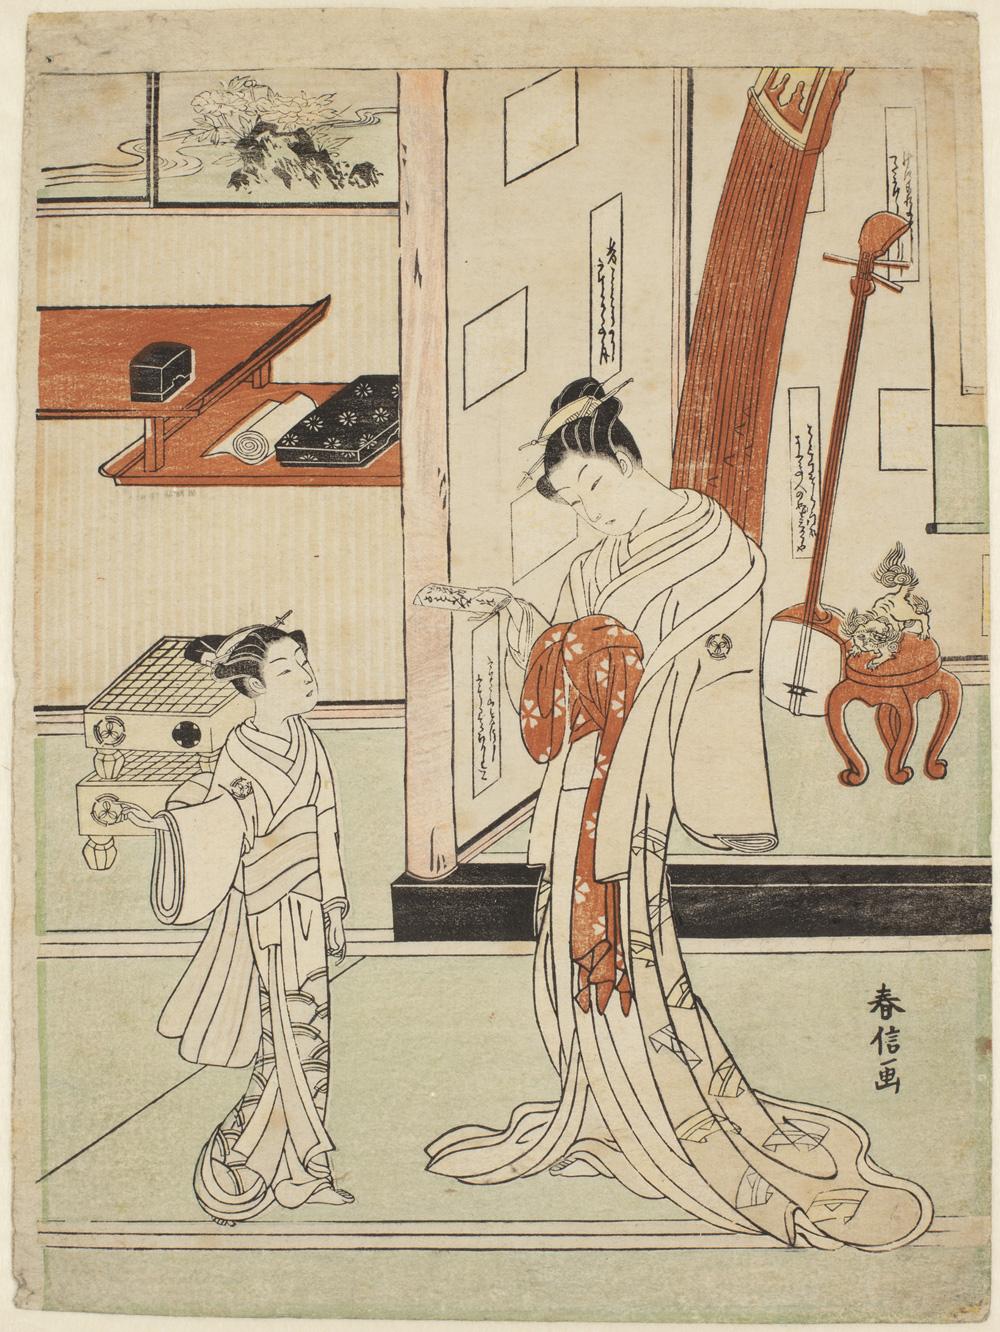 Japanese print of two figures standing in traditional robes in a room. The woman wears long flowing robes and the young attendant looks at her. Behind them are musical instruments and a stool.